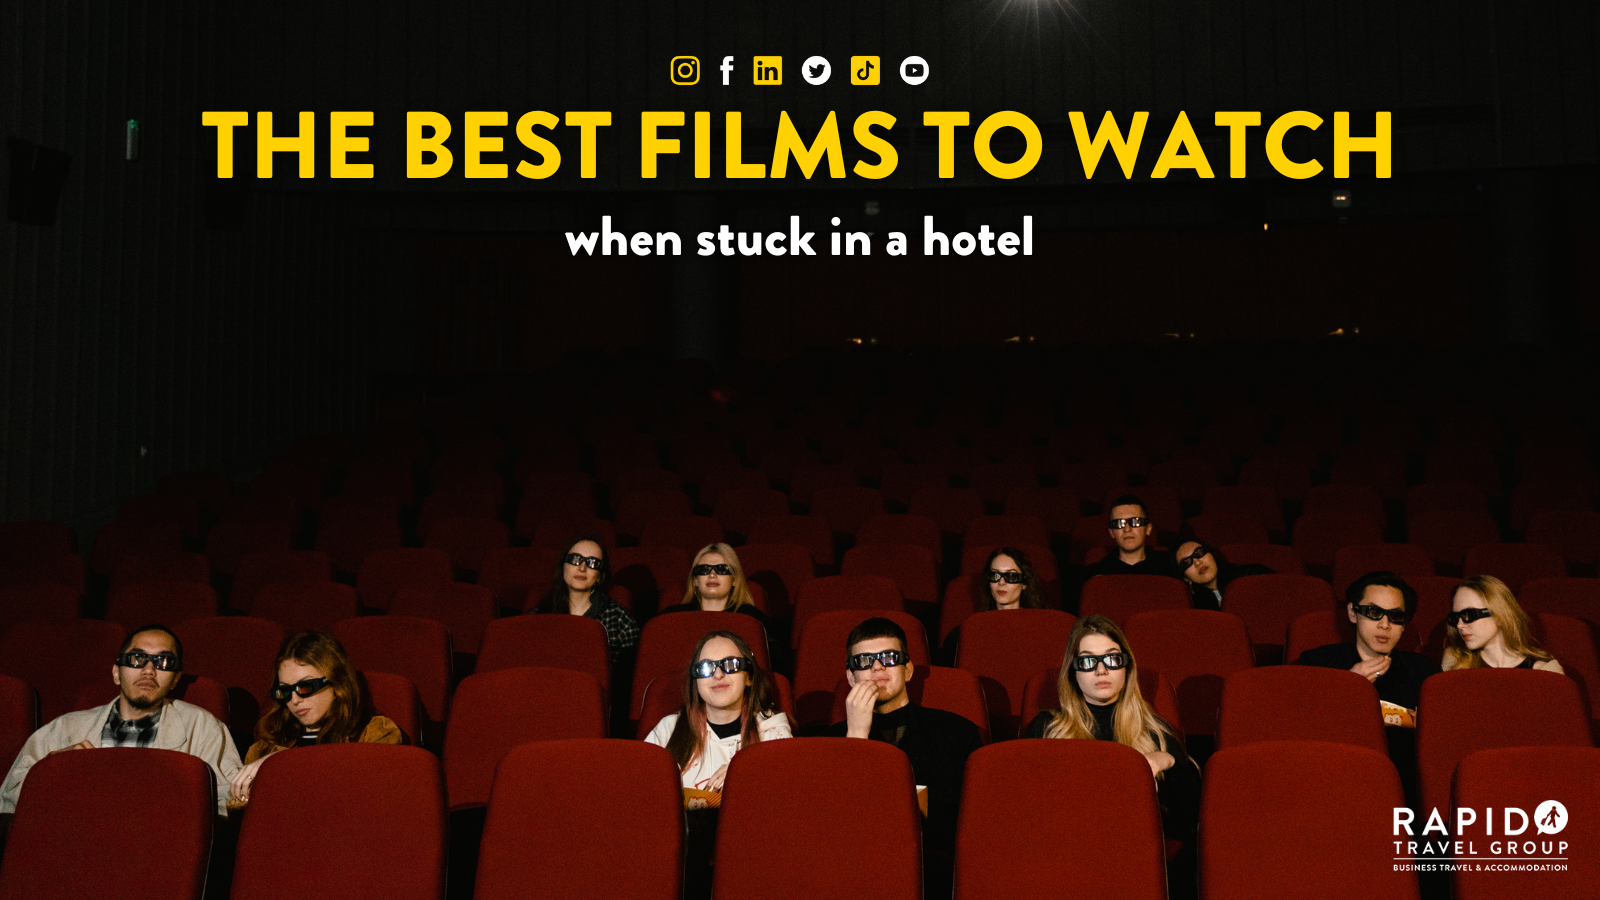 The Best Films to watch when stuck in a hotel